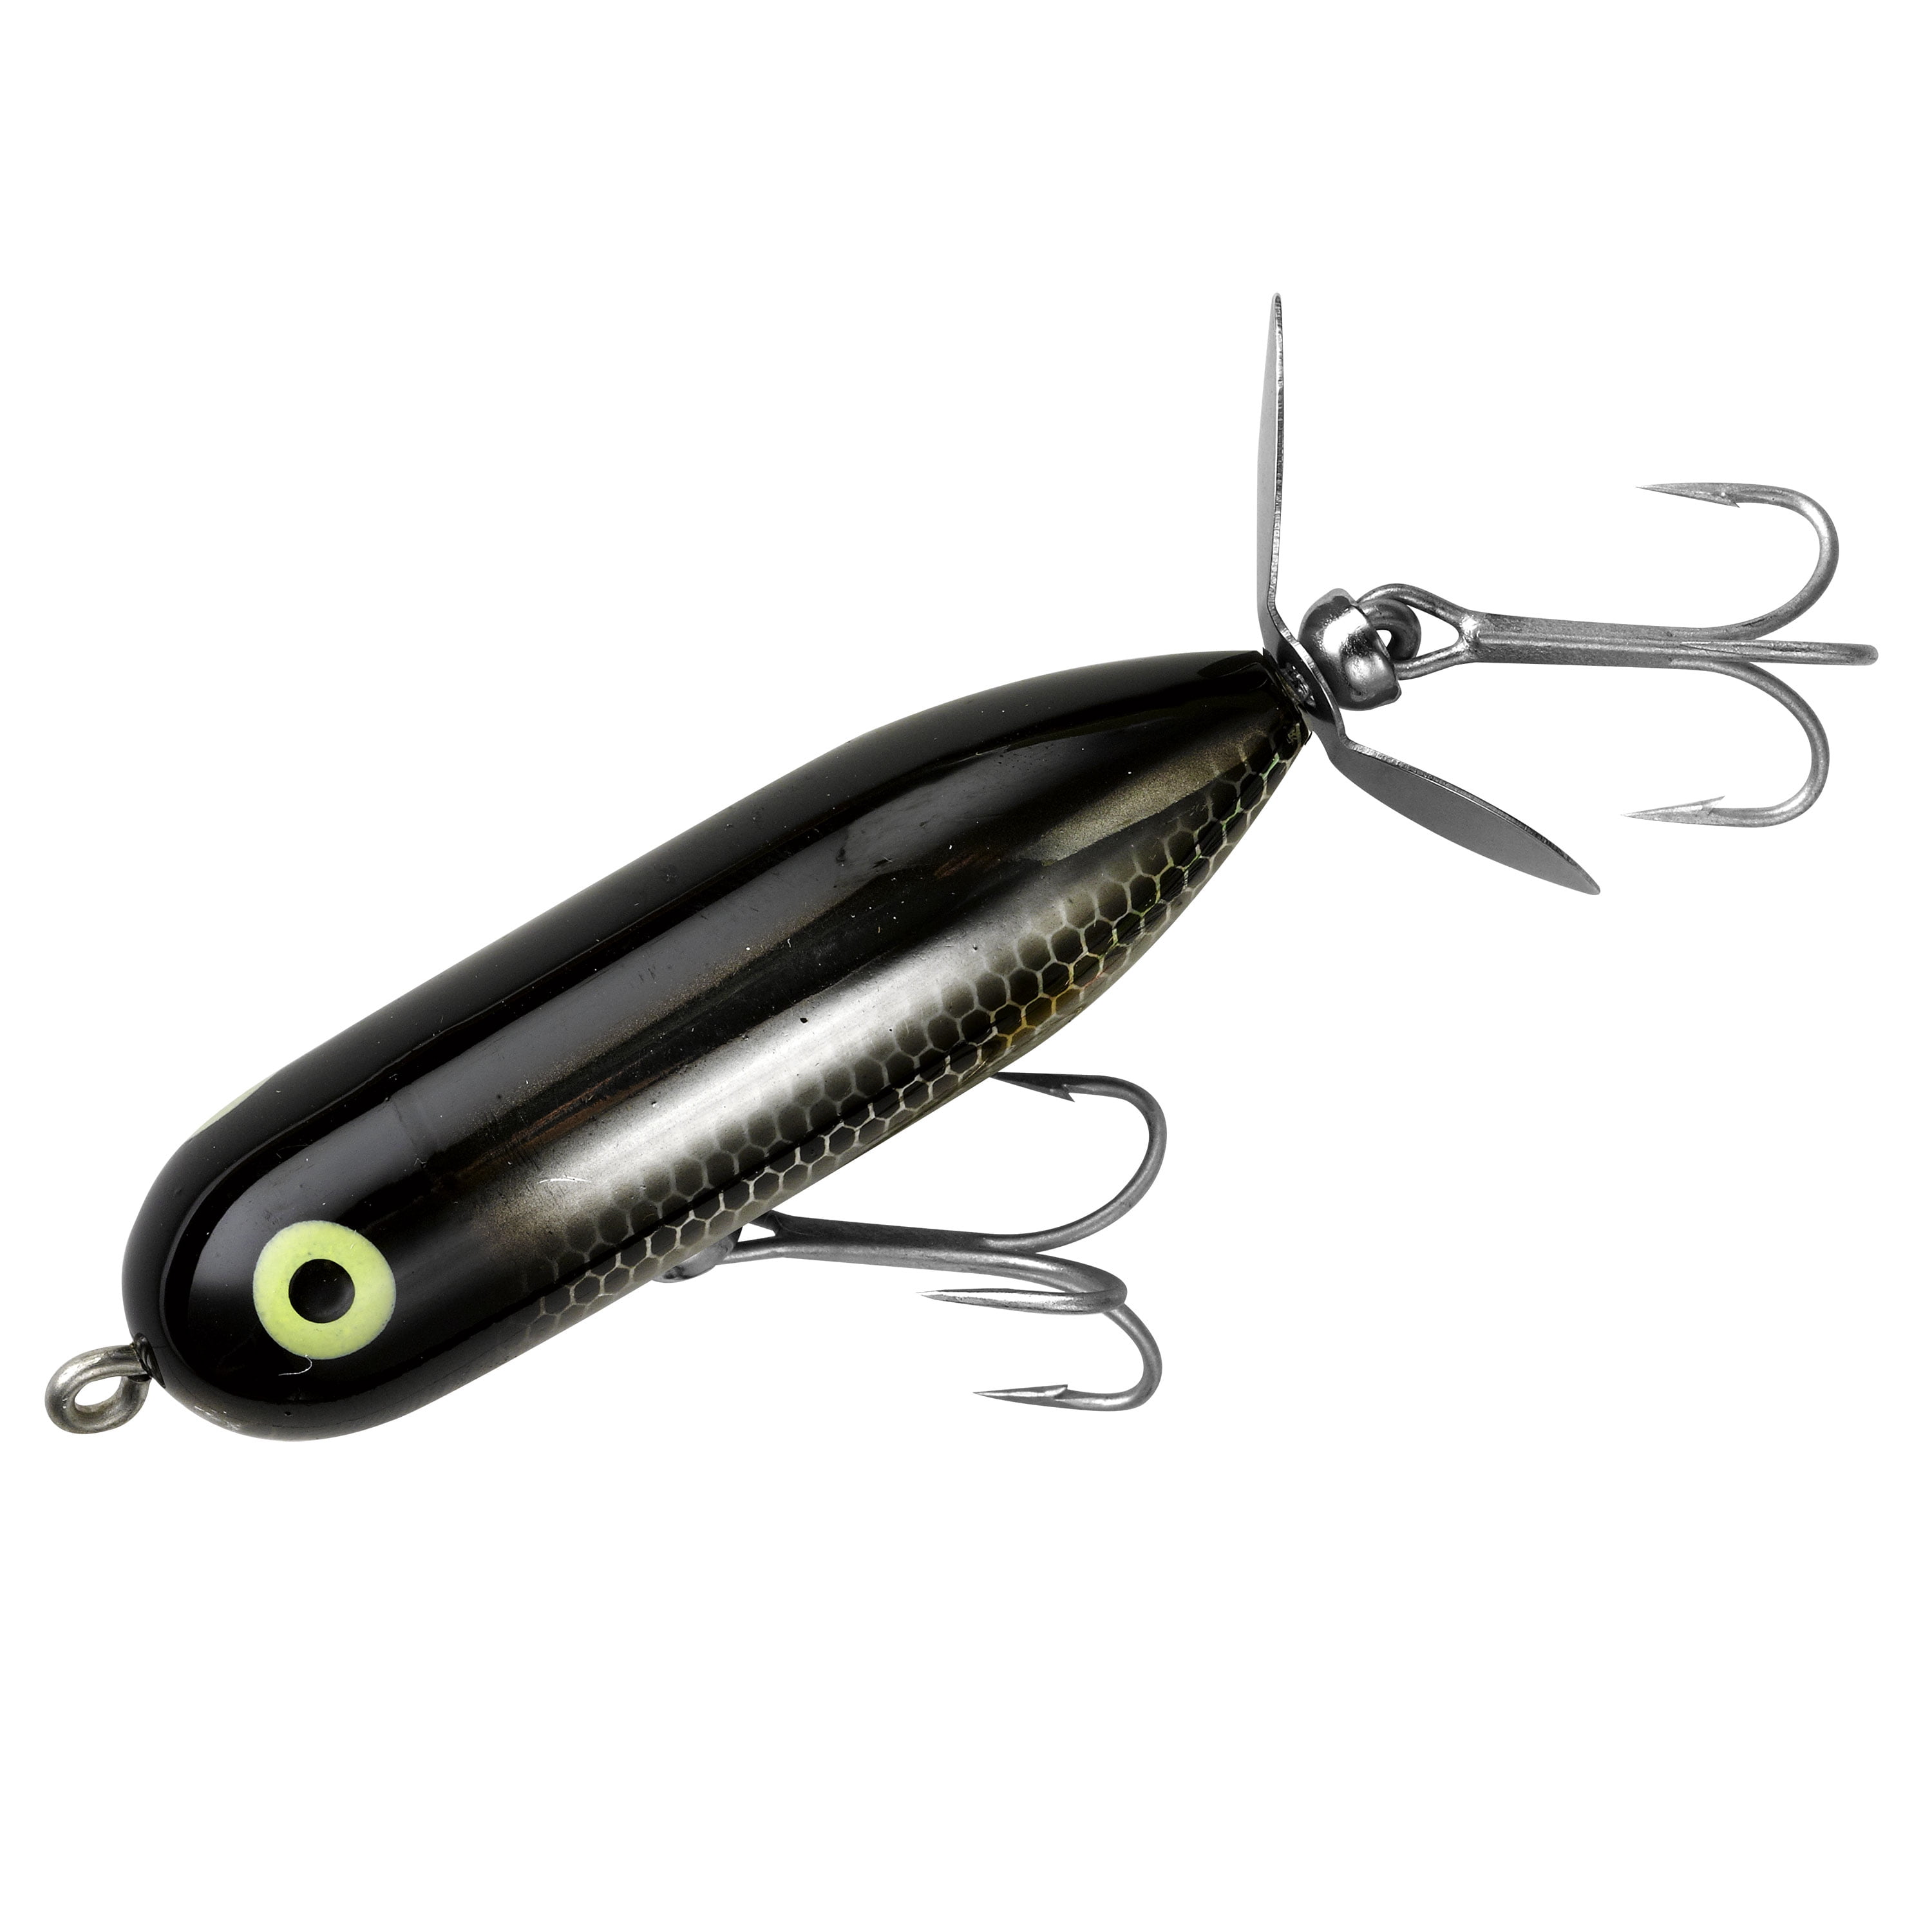 The top two lures are Heddon Tiny Torpedoes. The third lure is a